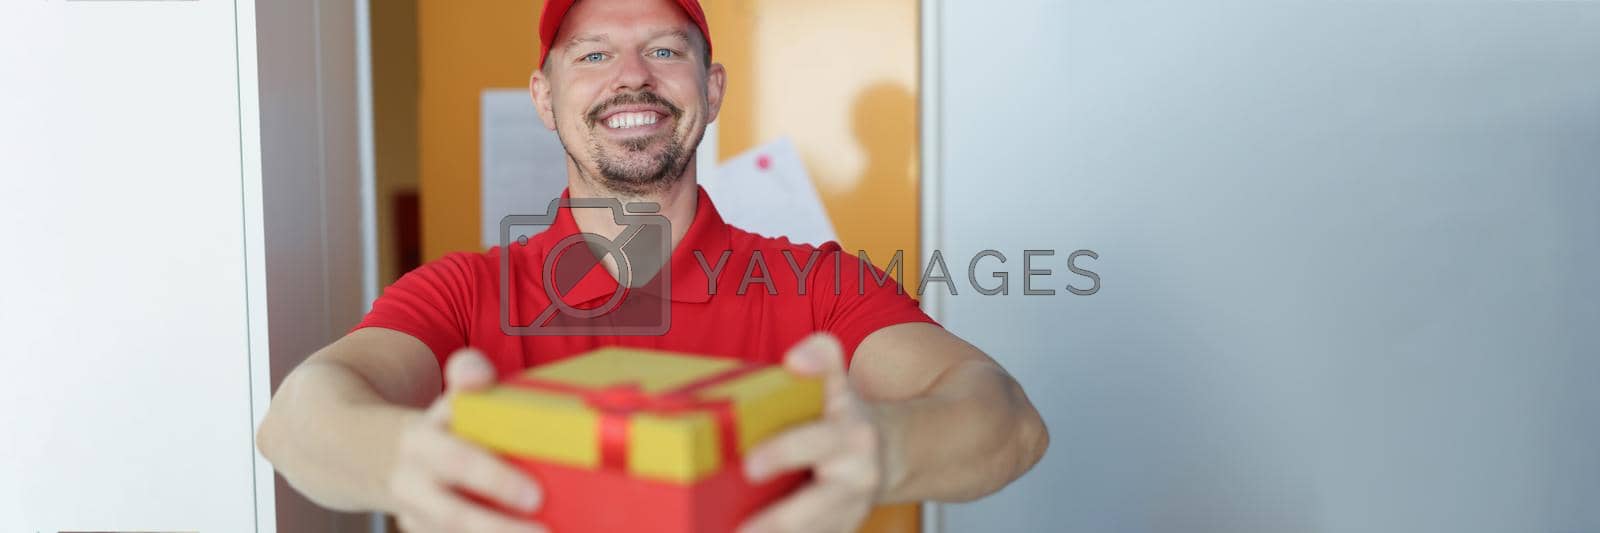 Royalty free image of Kind delivery man in uniform by kuprevich